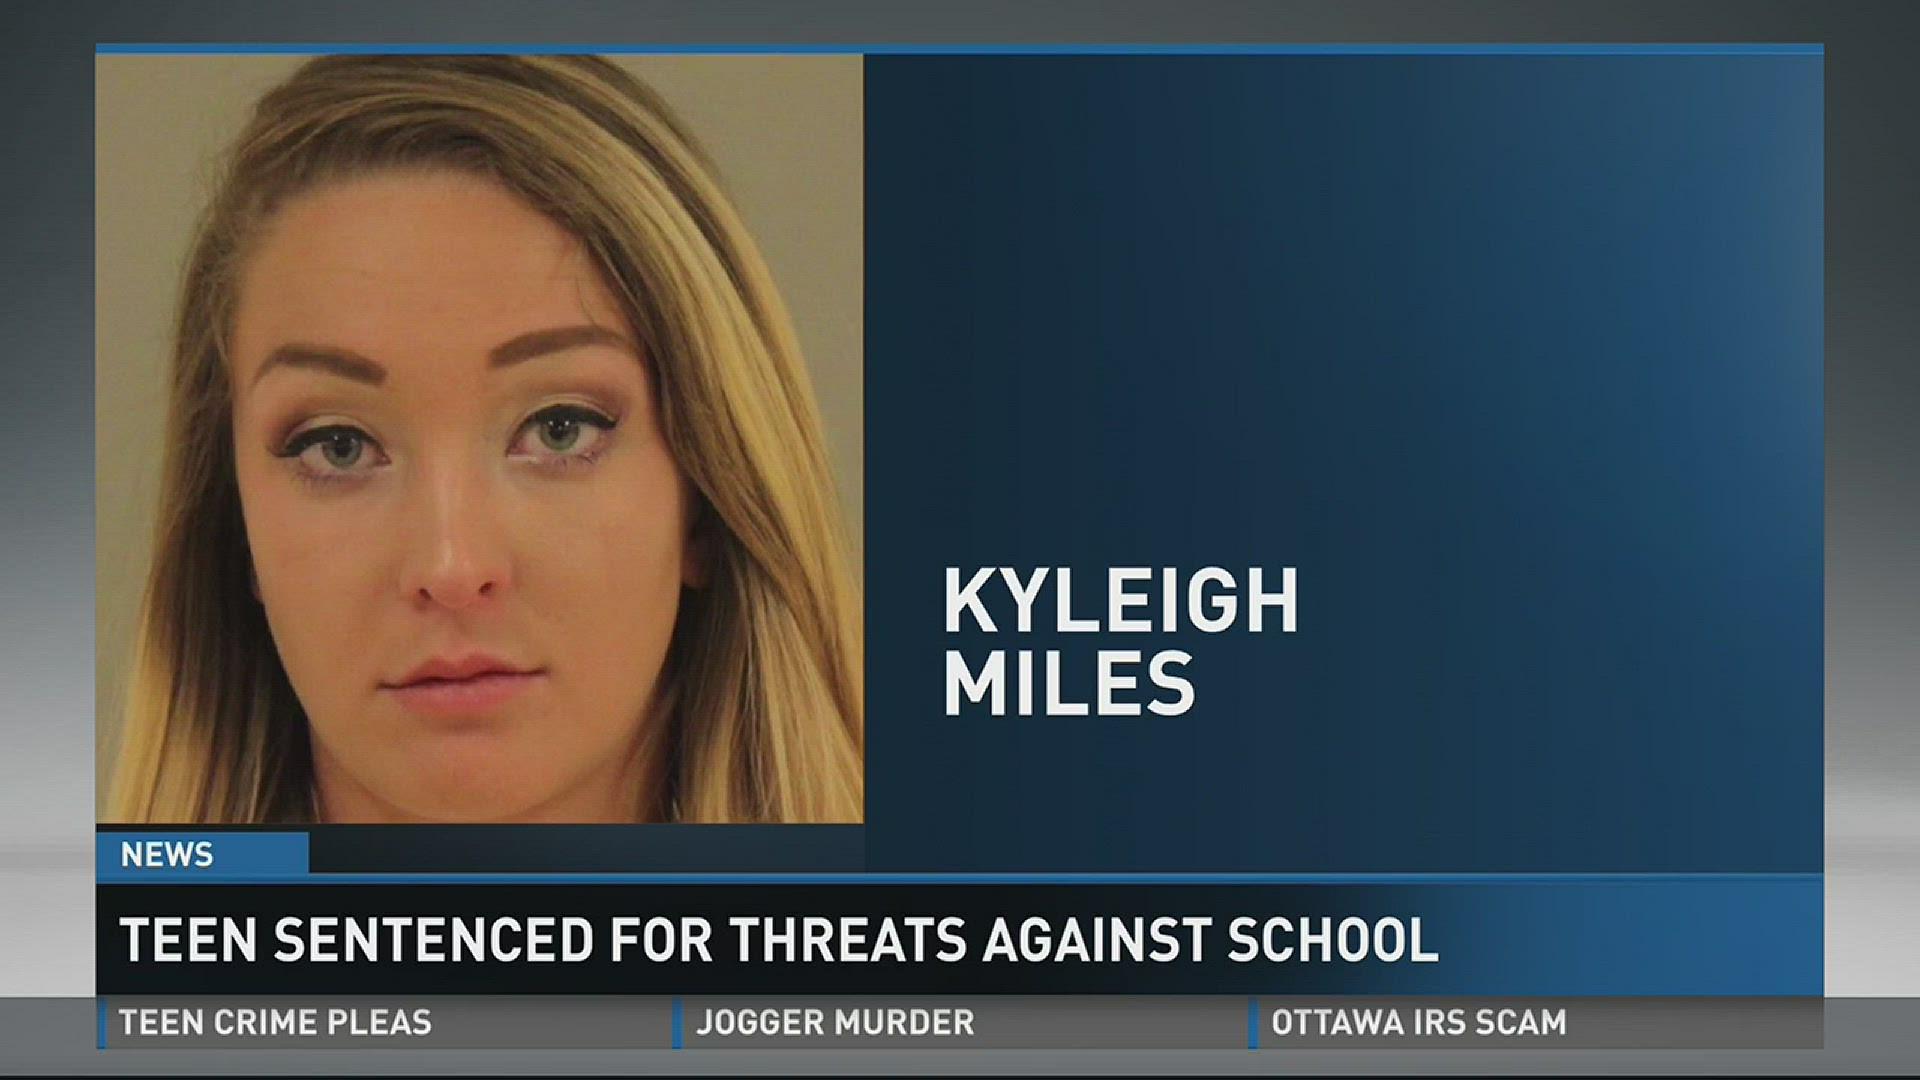 Kyleigh Miles, 17, admitted to making the threat because of bullying.